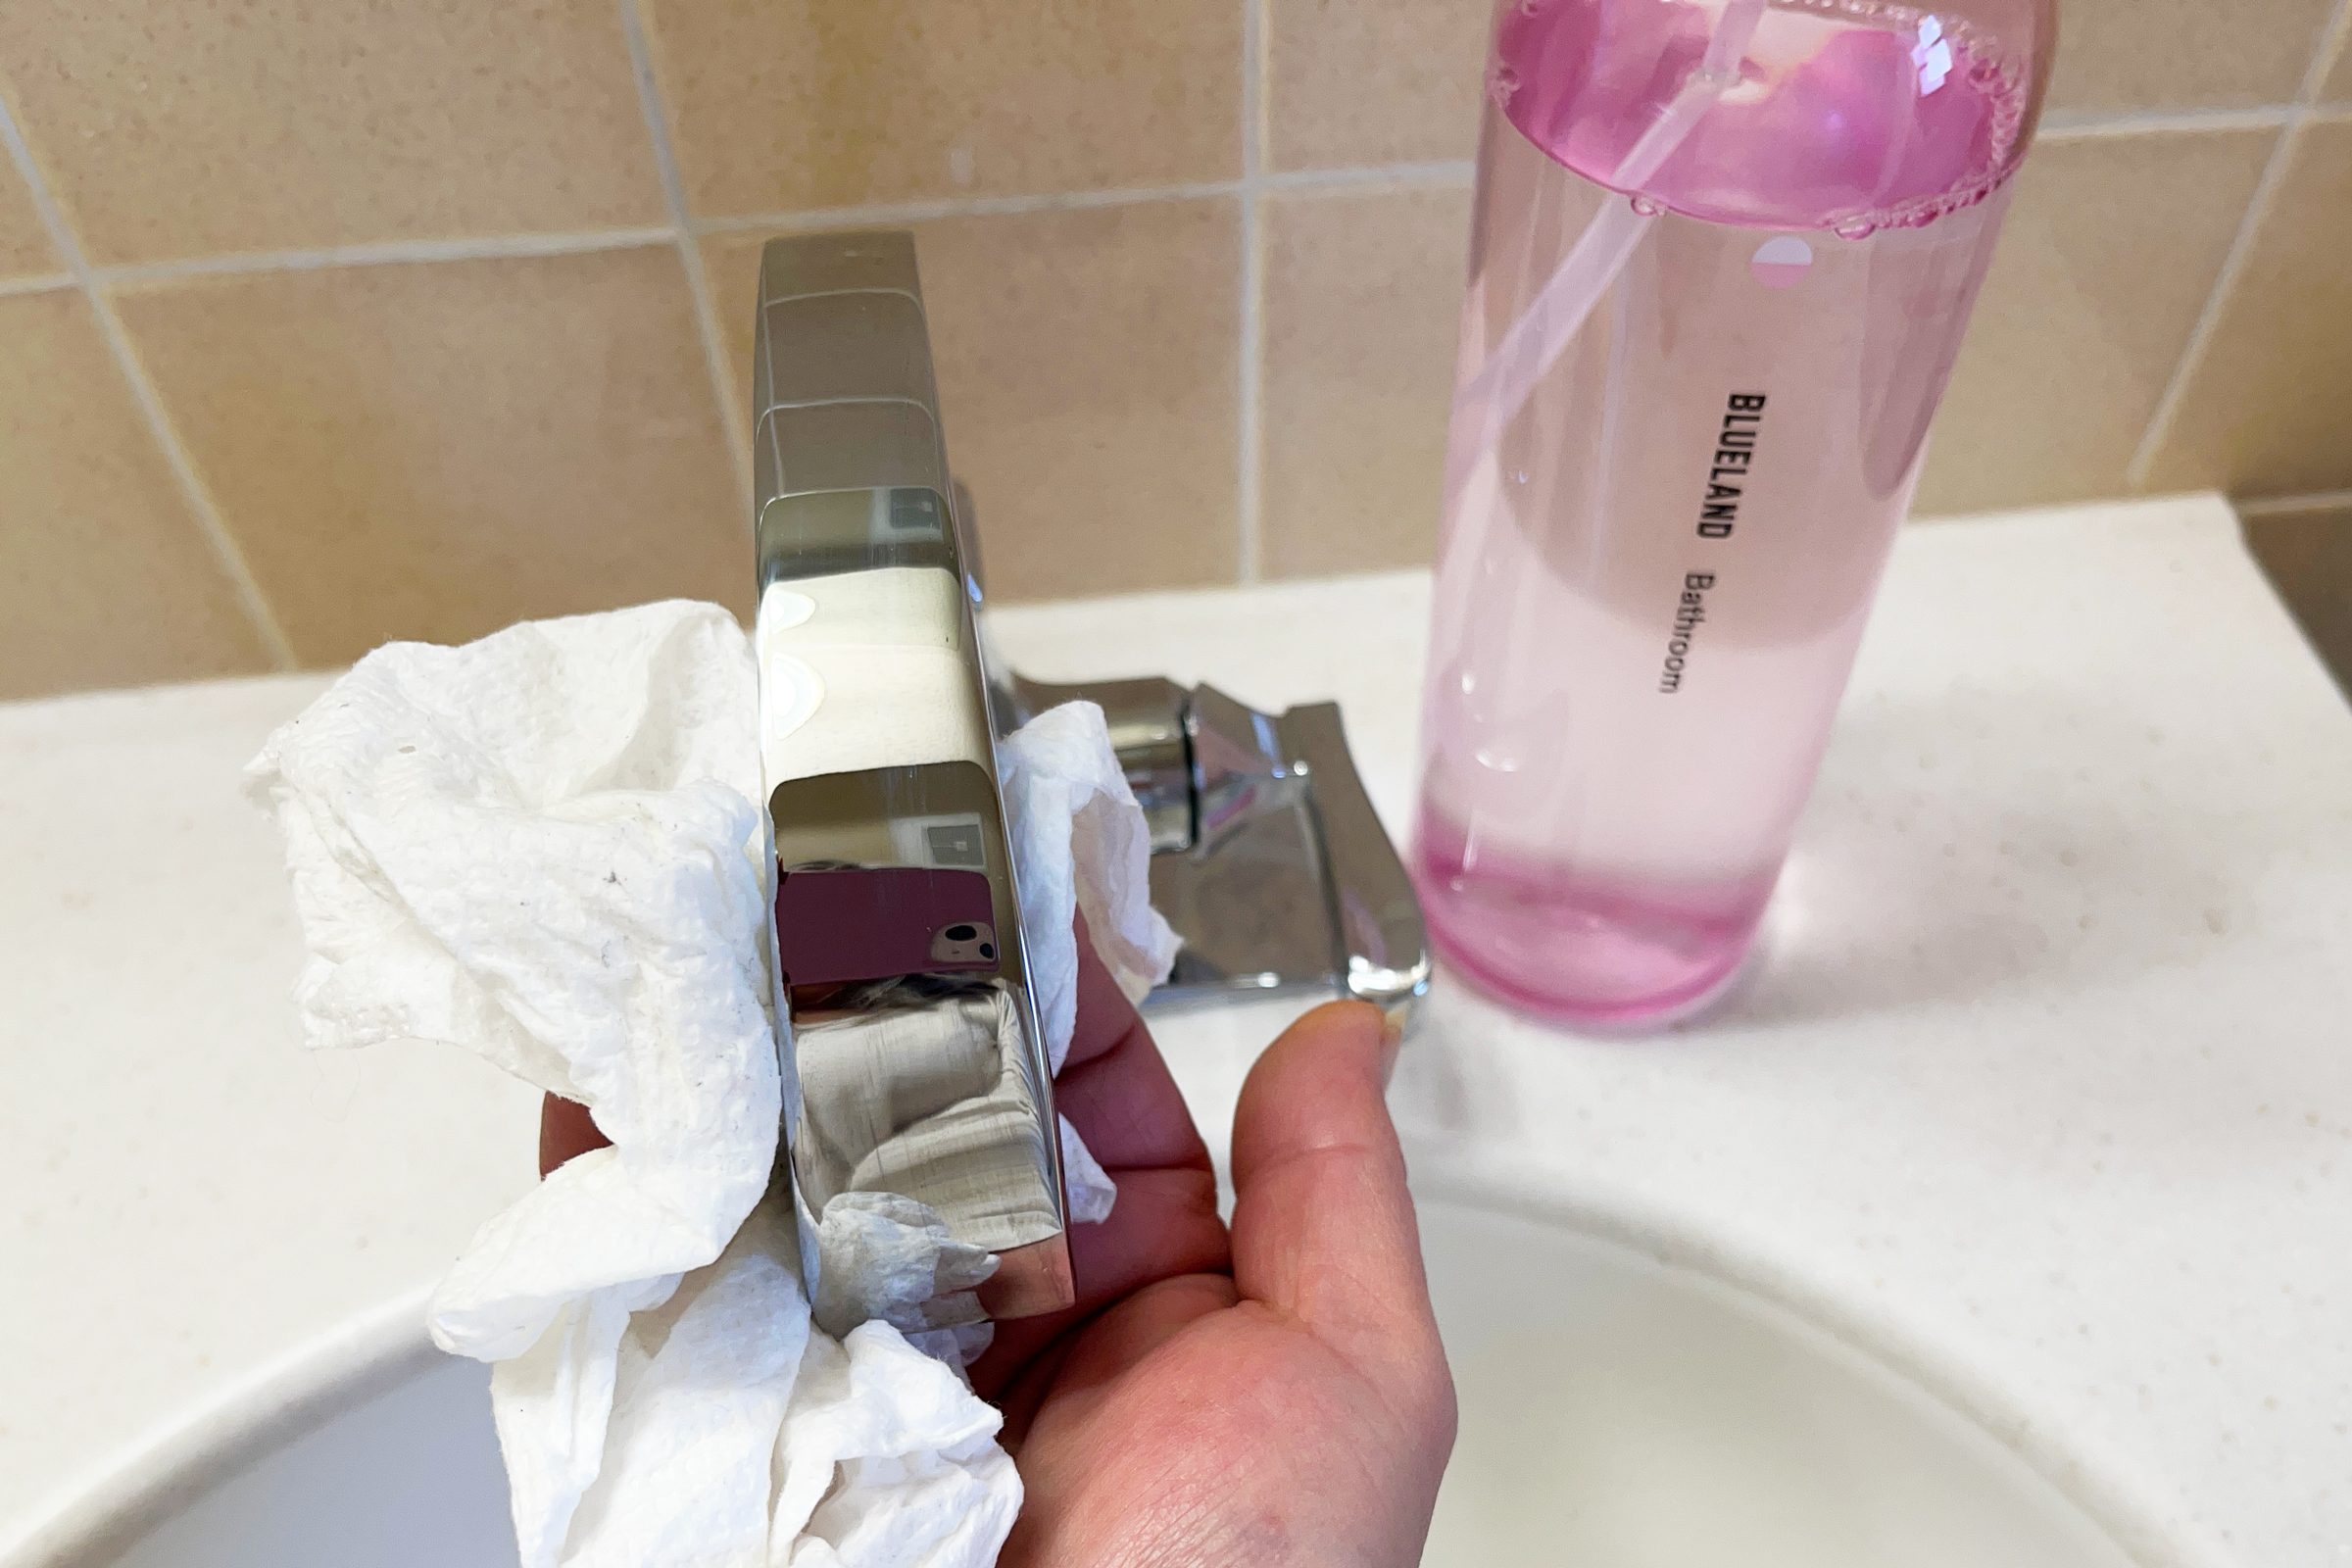 hand cleaning a bathroom sink faucet with a pink bottle from the Blueland Cleaning Kit